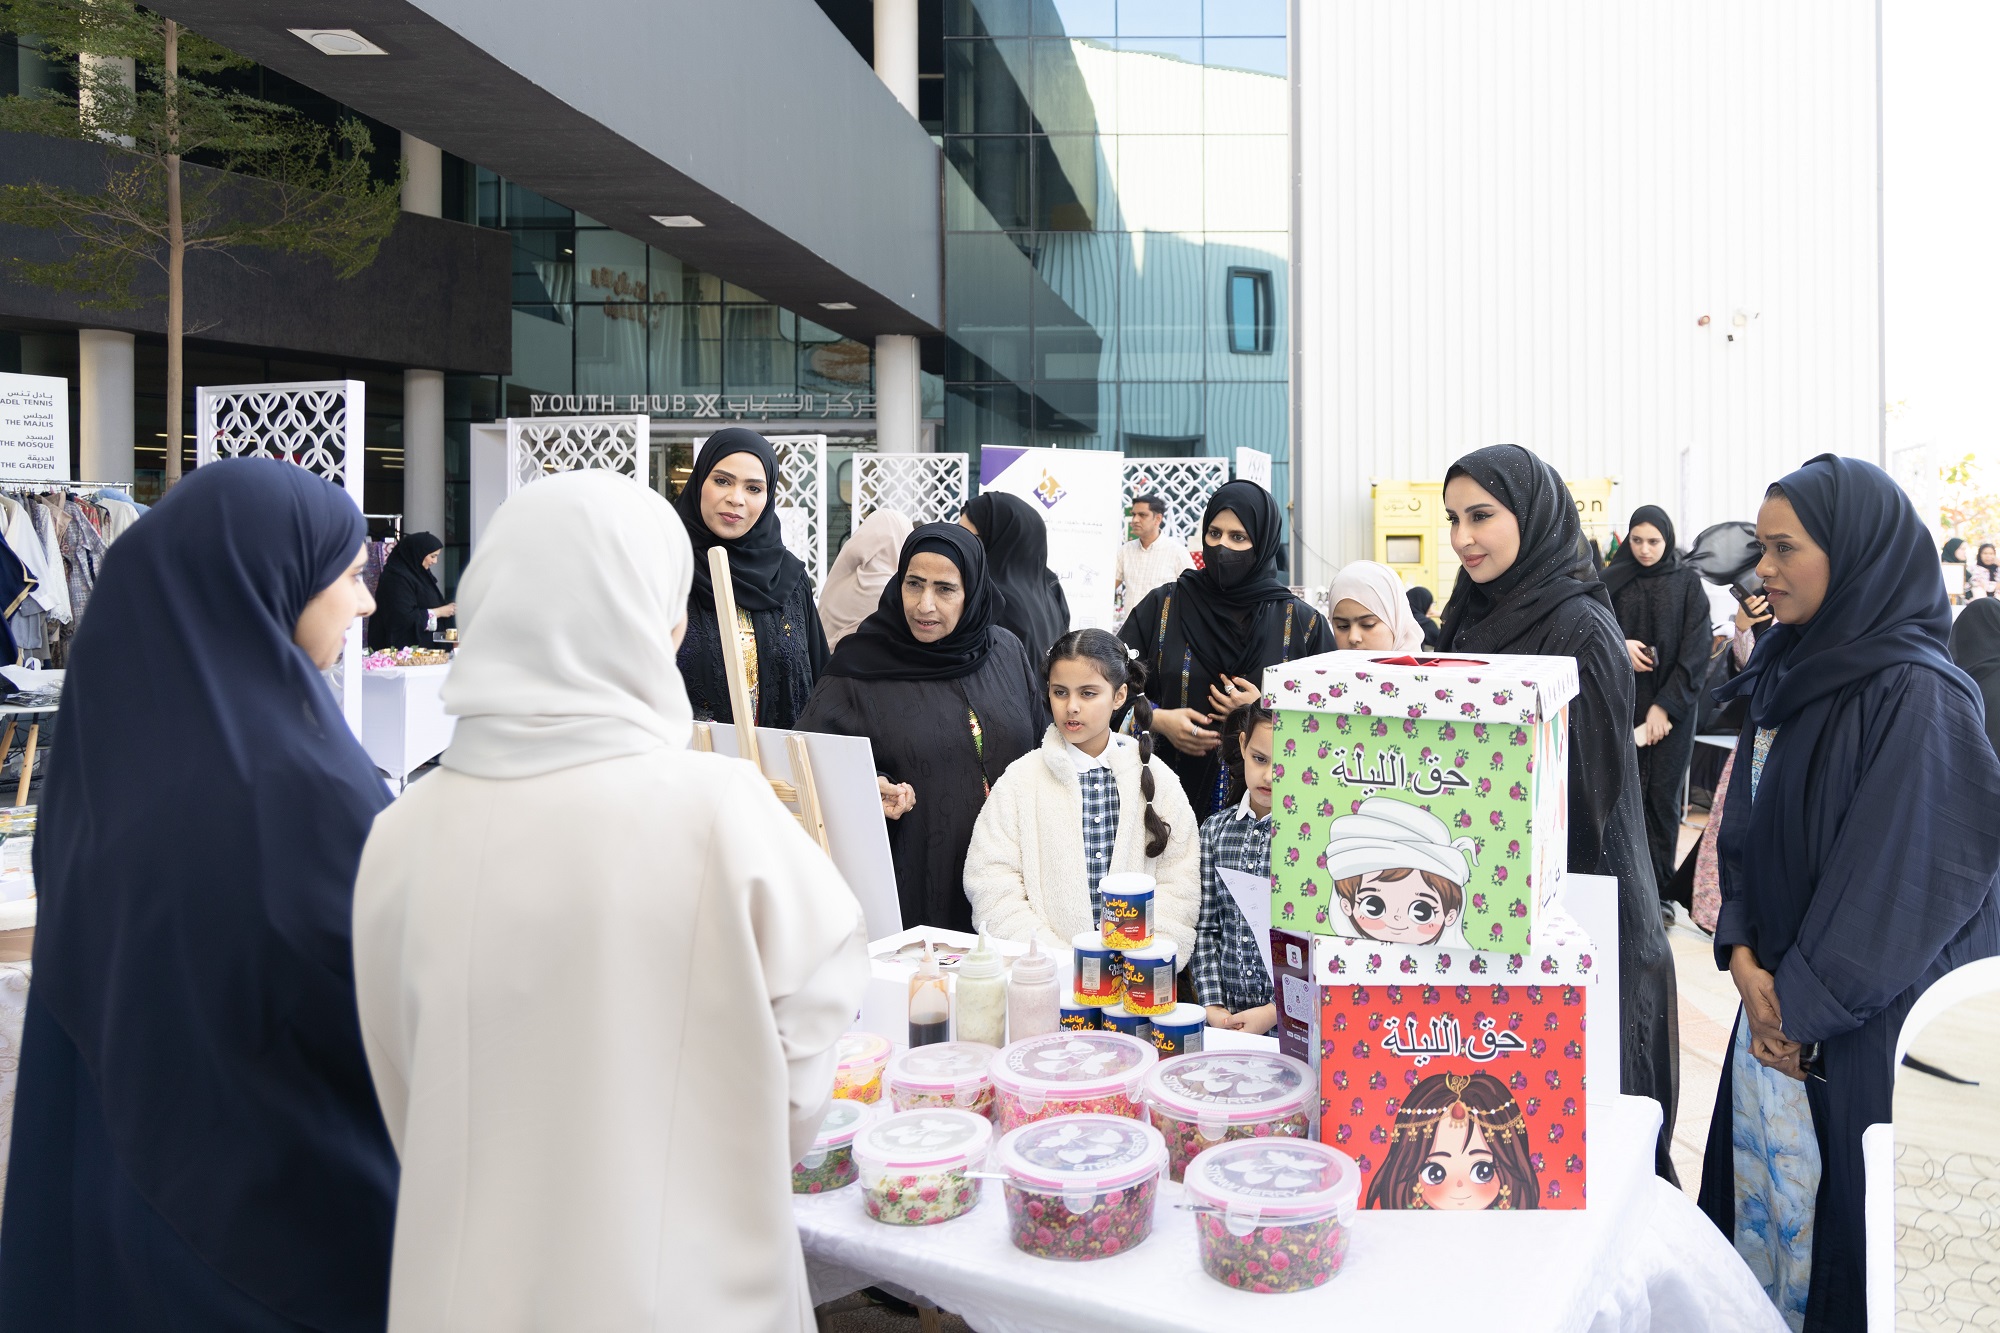 AJBWC organizes the “Haq Al Laila” exhibition with the participation of 27 projects